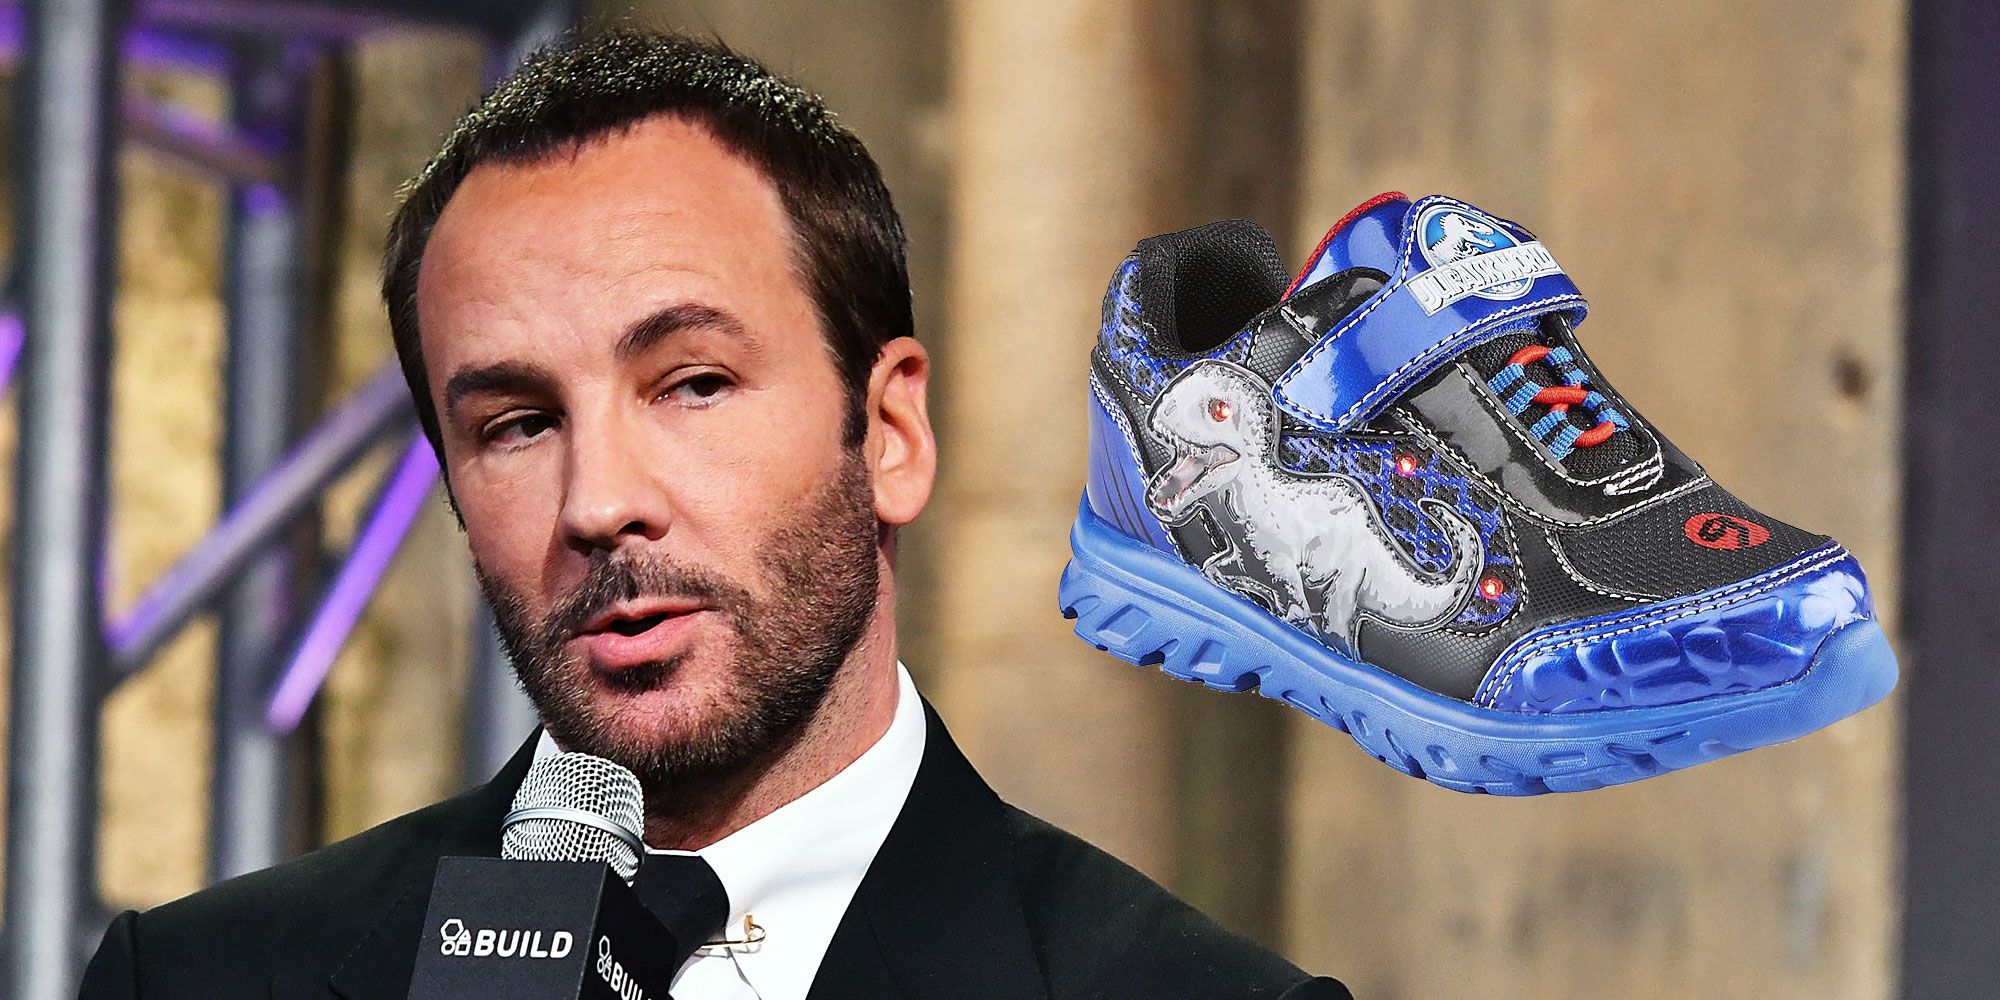 entusiasme Bygger båd Tom Ford Tells His 4-Year-Old Son His Dinosaur Shoes Are "Tacky"